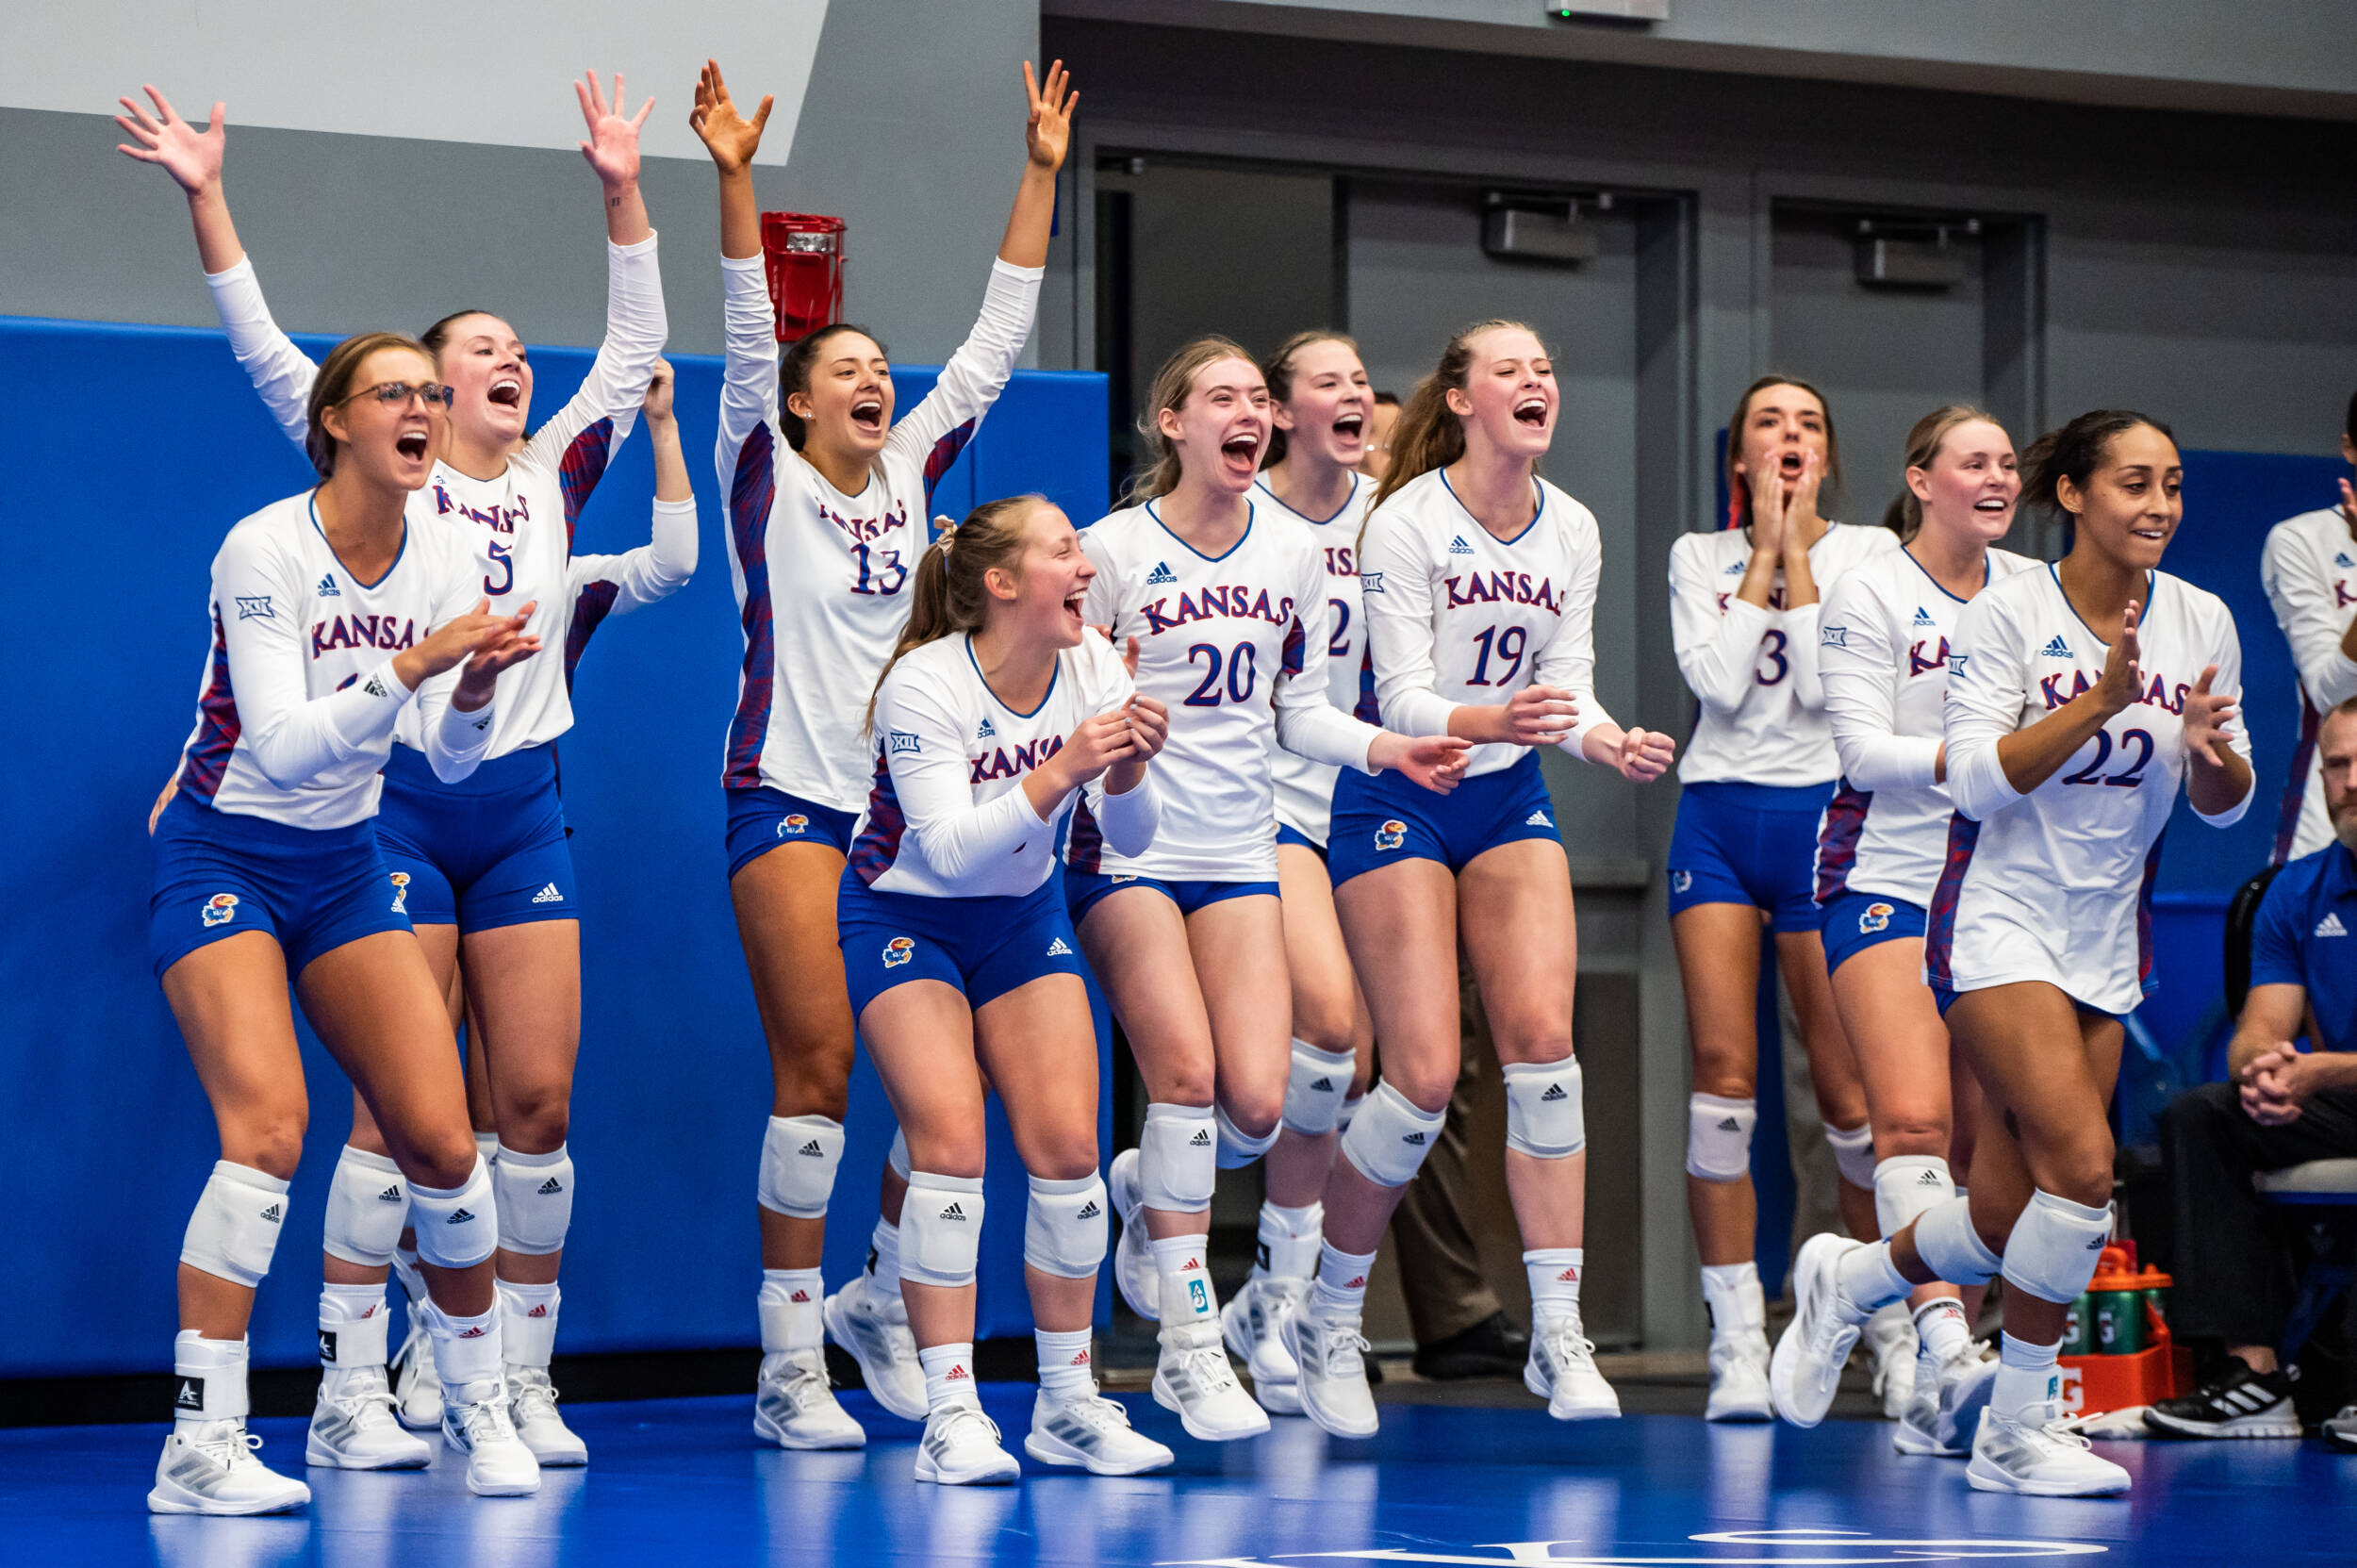 Match Primer: How To Watch, Things to Know for Kansas Volleyball at Oklahoma